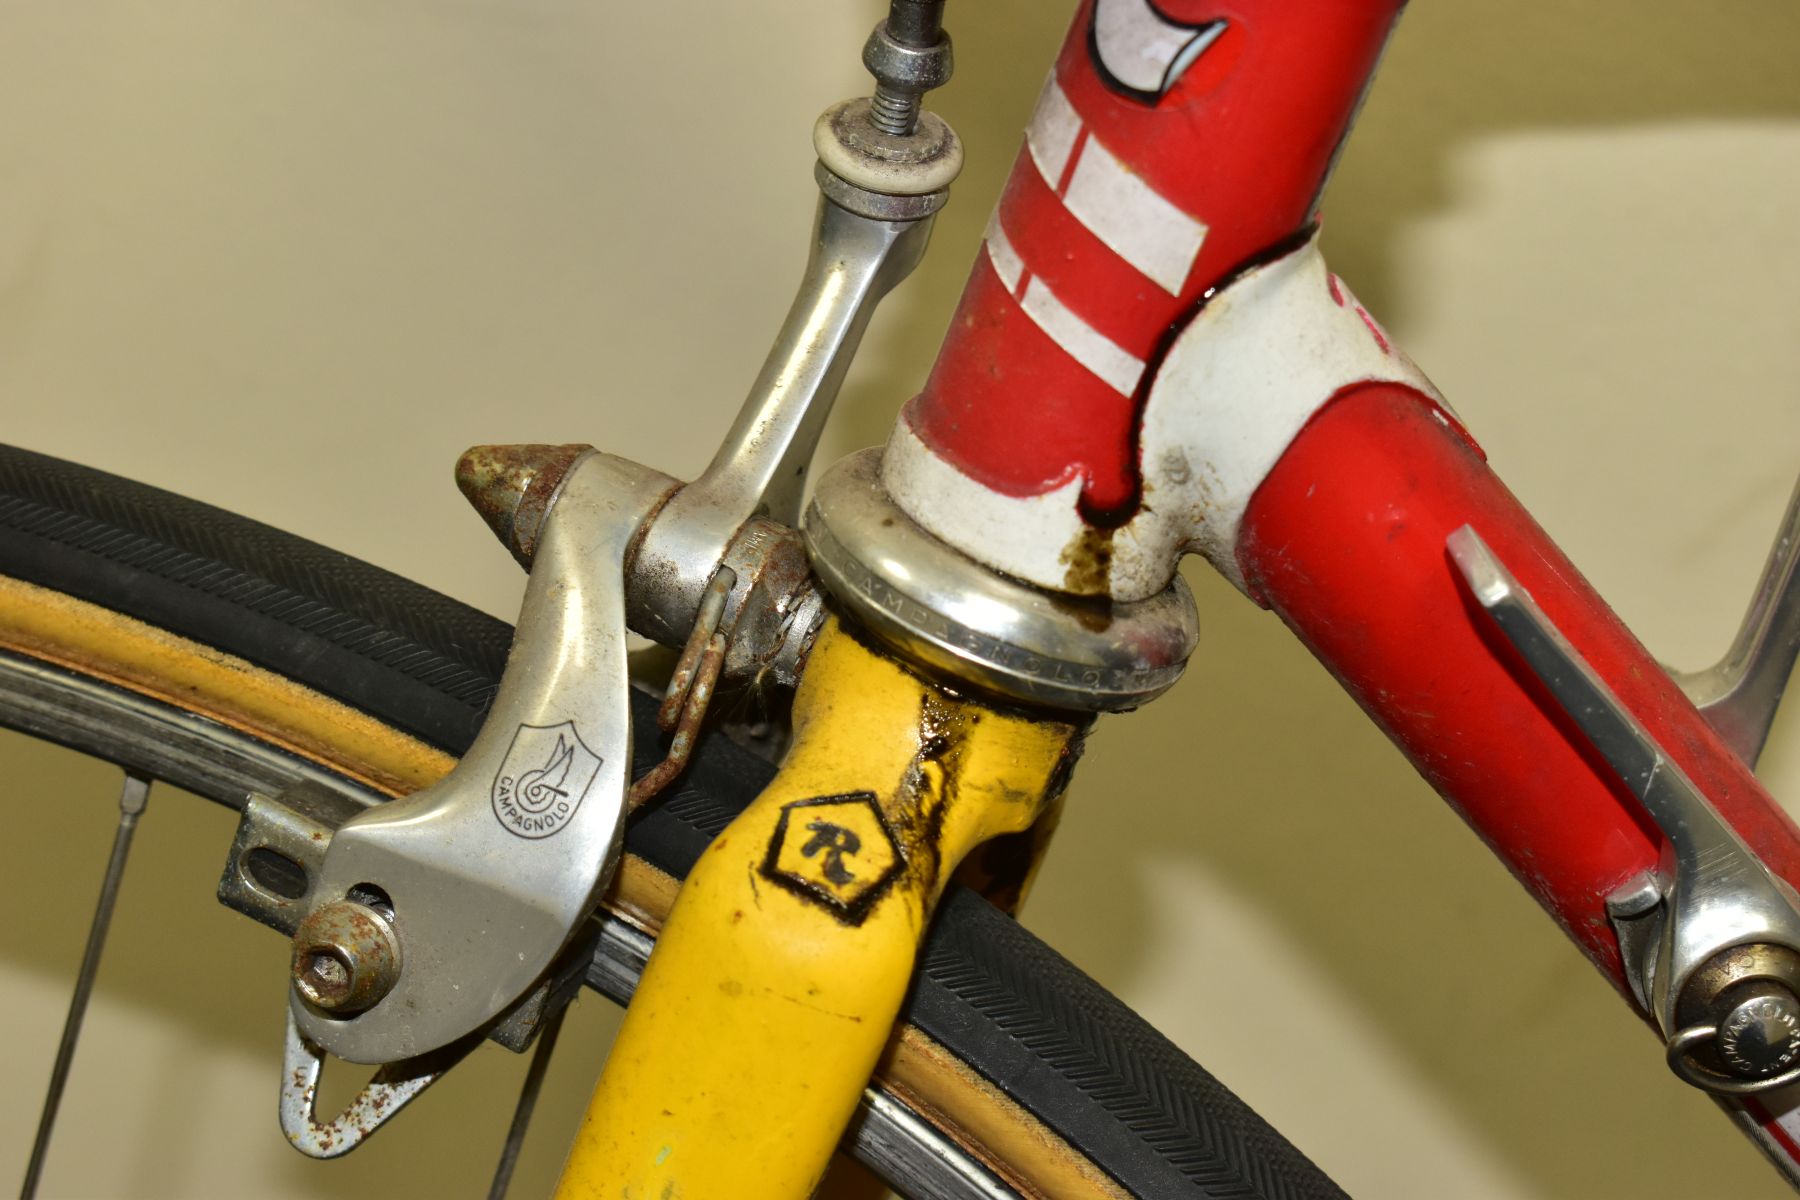 A VINTAGE ROSSIN RACING BICYCLE CIRCA 1980s, fitted with a Campagnolo front crank set and chain - Bild 10 aus 14